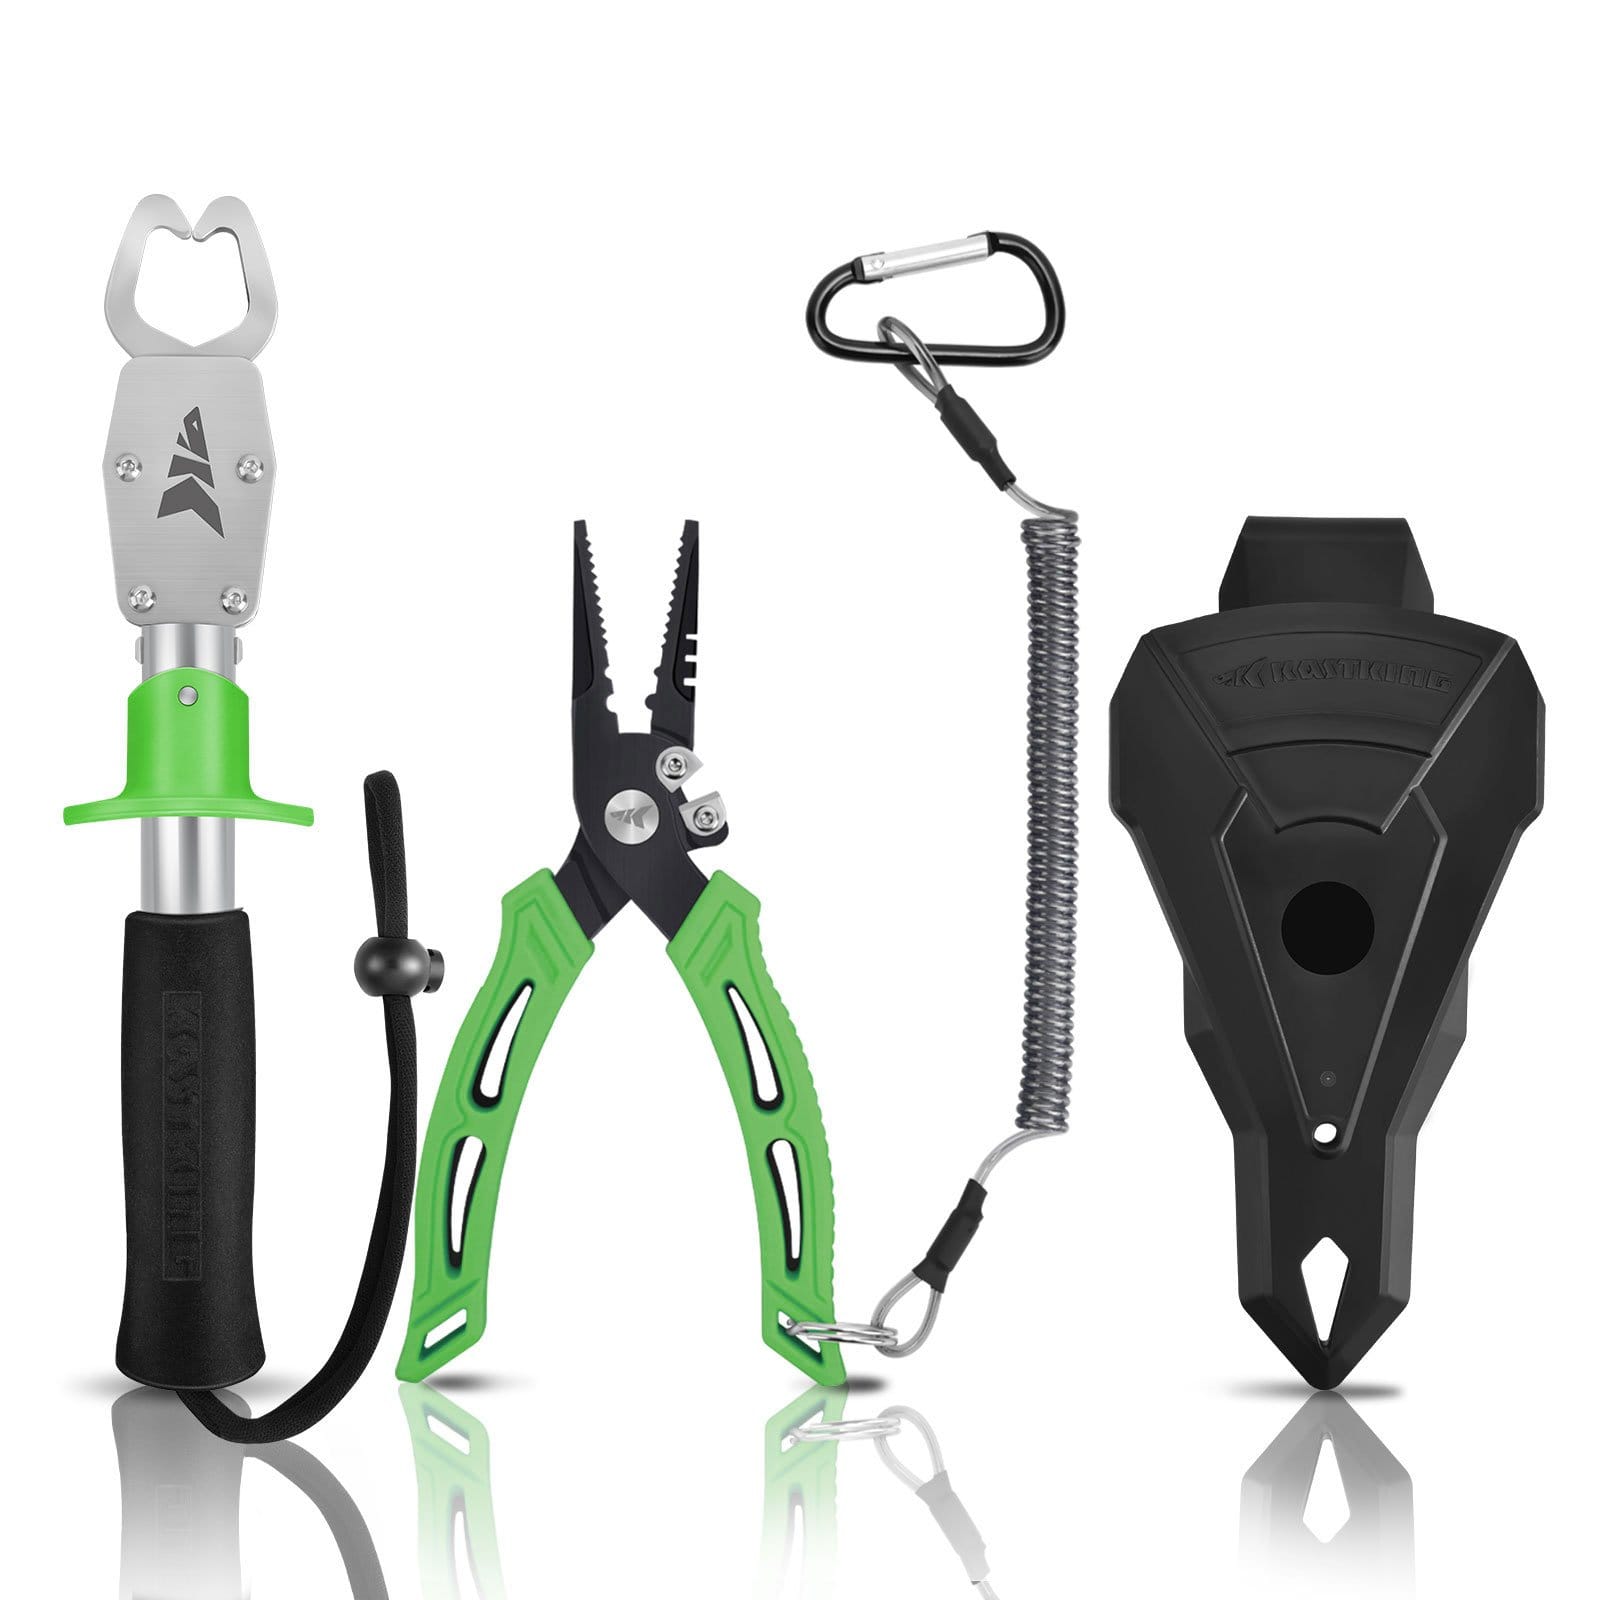 Strong Bite Force Durable Multifunctional Compact Fishing Pliers